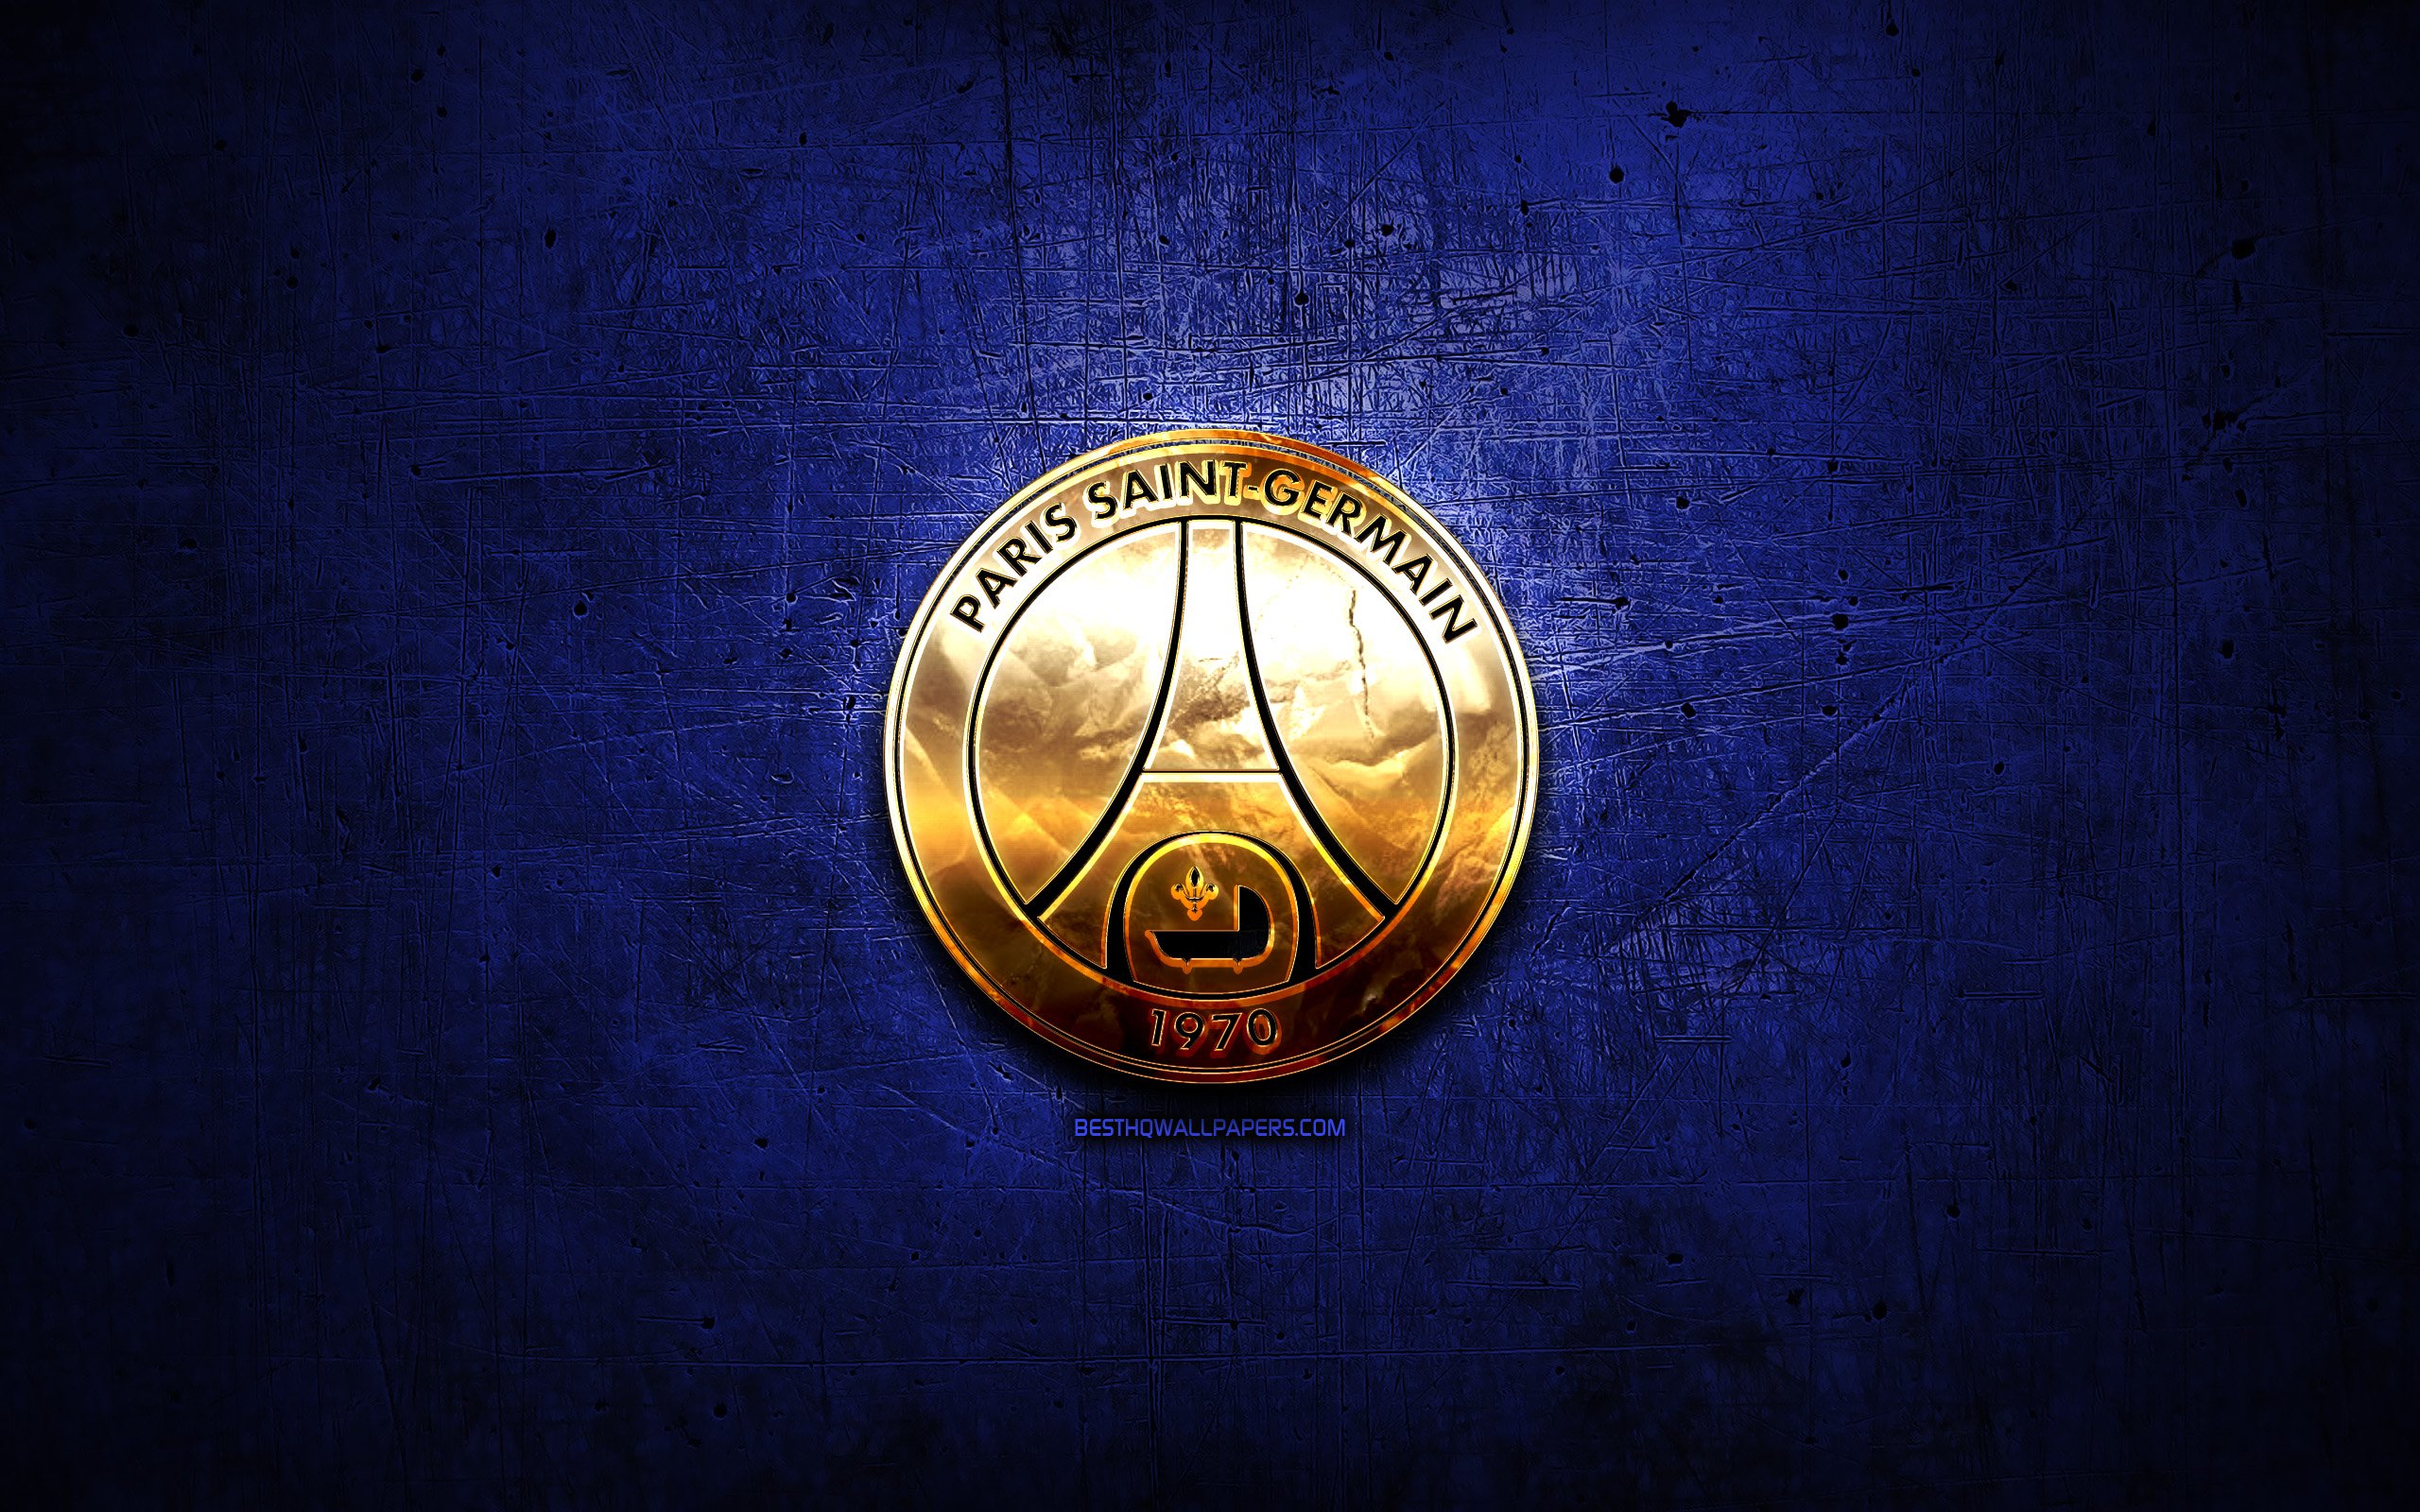 Download Wallpaper Paris Saint Germain FC, Golden Logo, Ligue Blue Abstract Background, Soccer, French Football Club, PSG Logo, Football, PSG, France, Paris Saint Germain For Desktop With Resolution 2560x1600. High Quality HD Picture